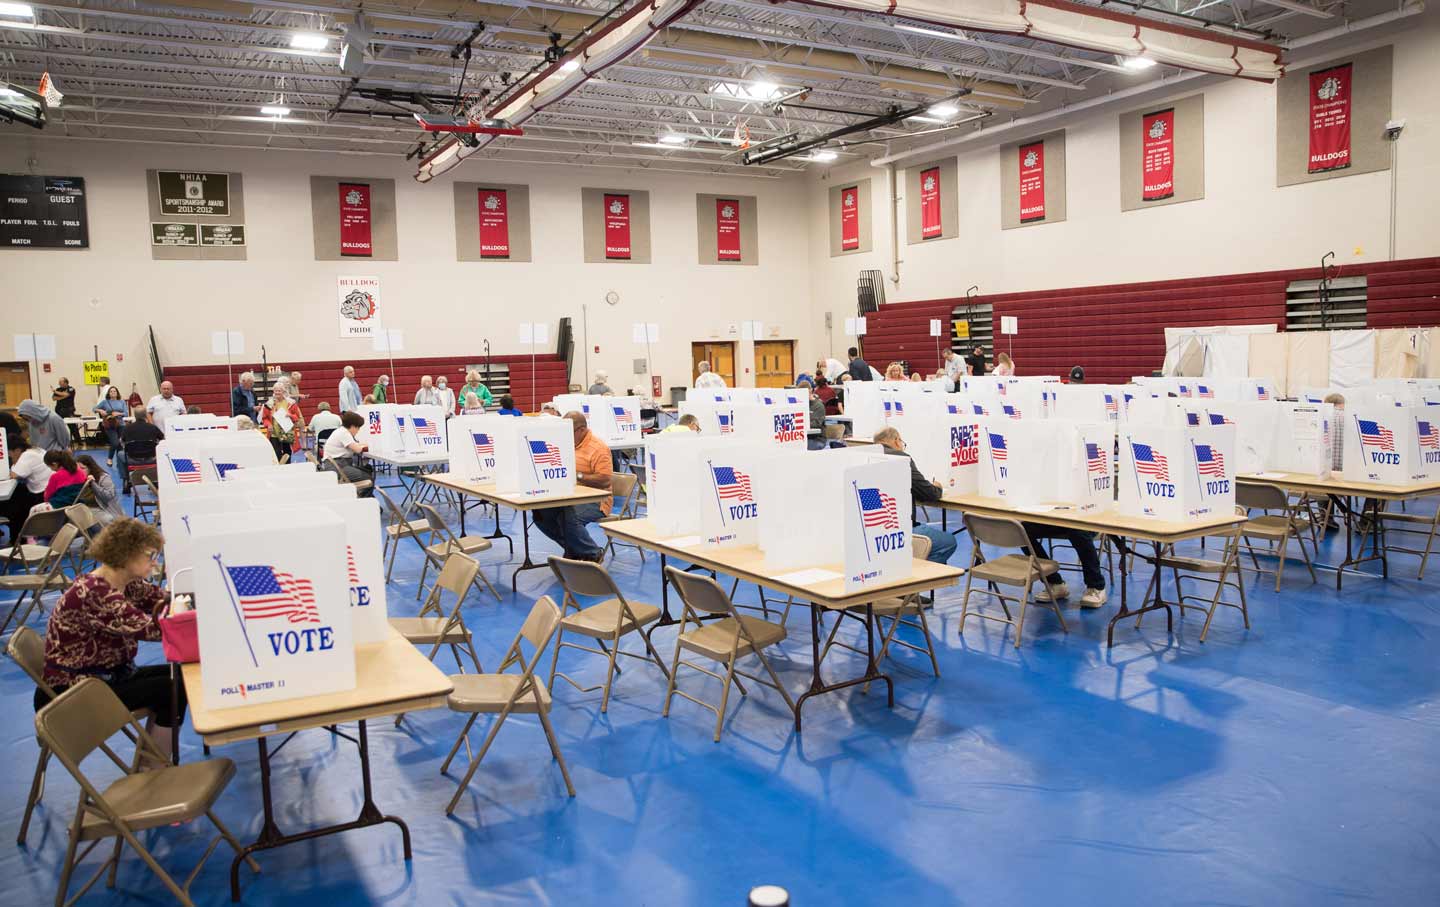 New Hampshire voters at voting booths in a gymnasium